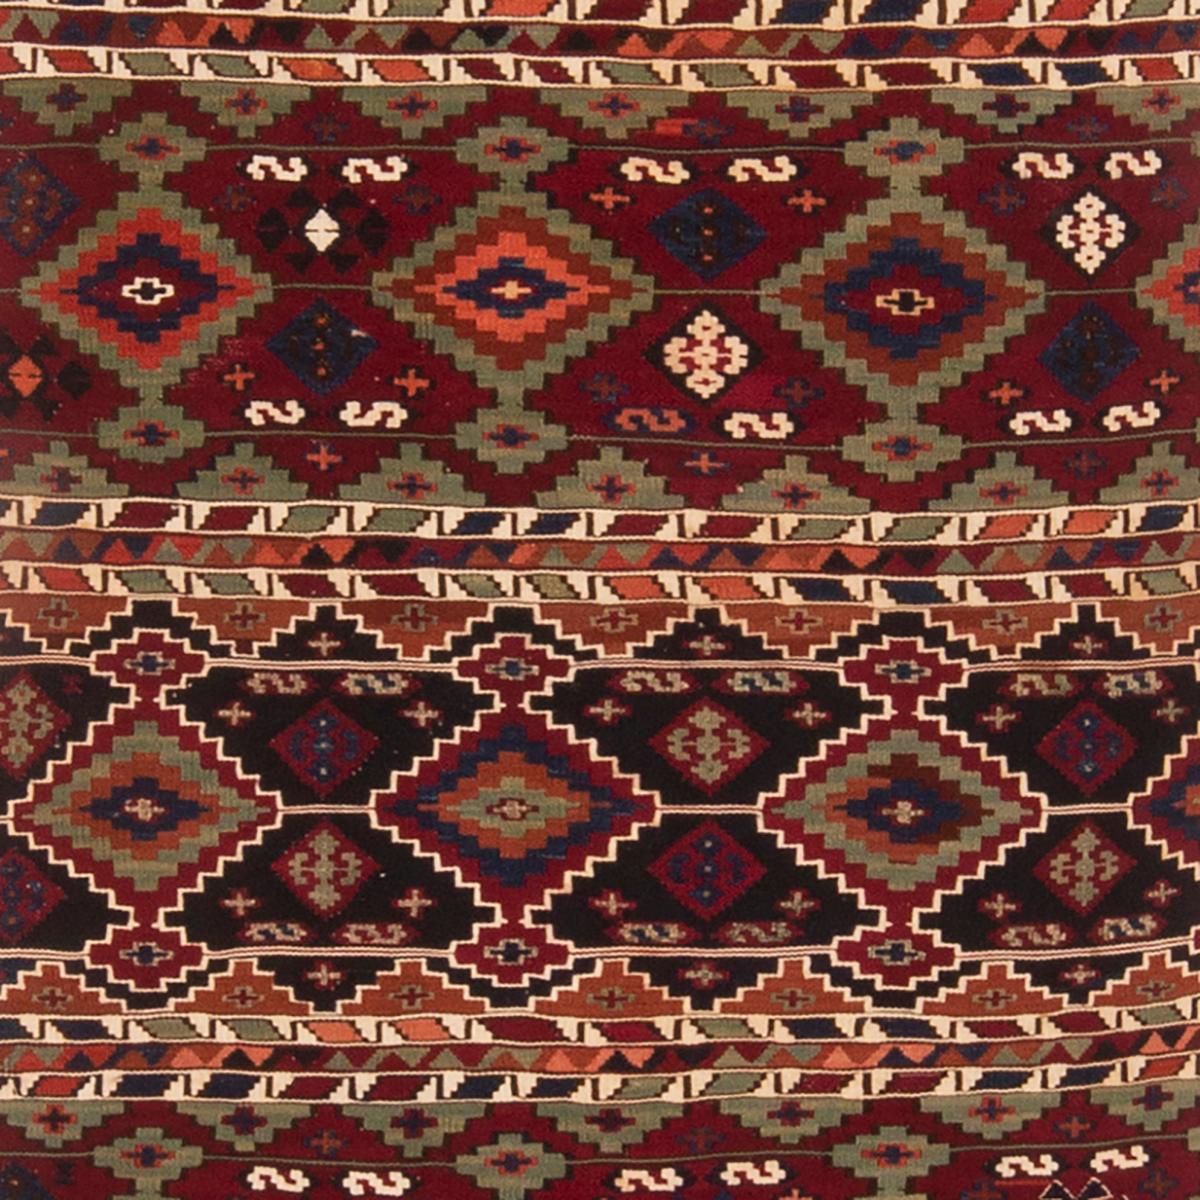 Originating from Turkey between 1900-1920, this antique geometric wool Kilim rug features a distinct combination of both iconic and seldom-seen Turkish symbols. flat-woven in high quality wool, the alternating rows of burgundy red and navy blue with